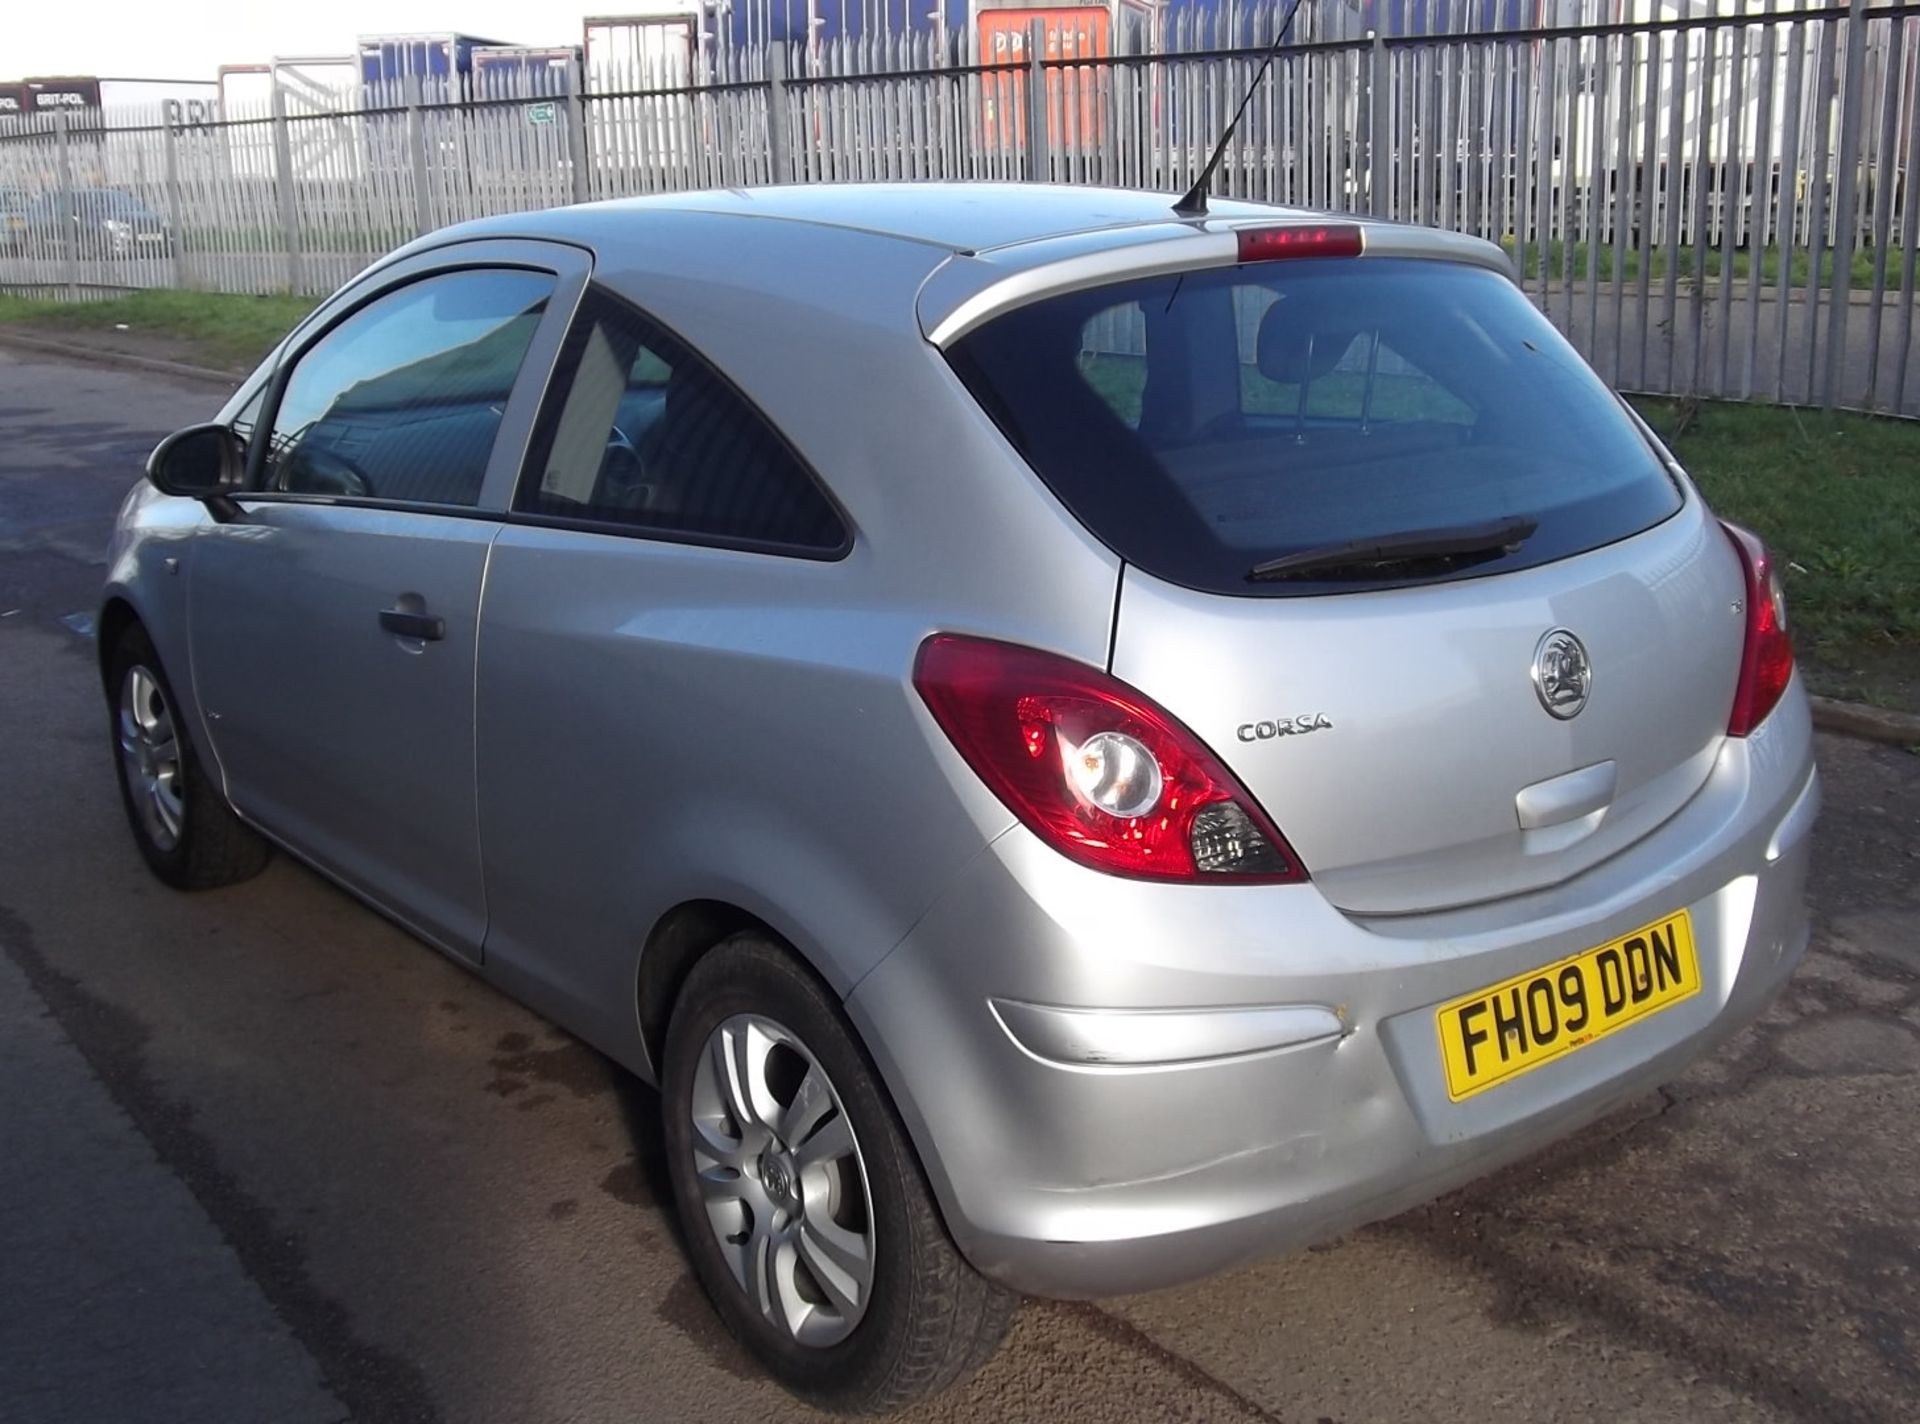 2009 Vauxhall Corsa 1.2 Active 3 Door Hatchback - CL505 - NO VAT ON THE HAMMER - Location: Corby, No - Image 8 of 13